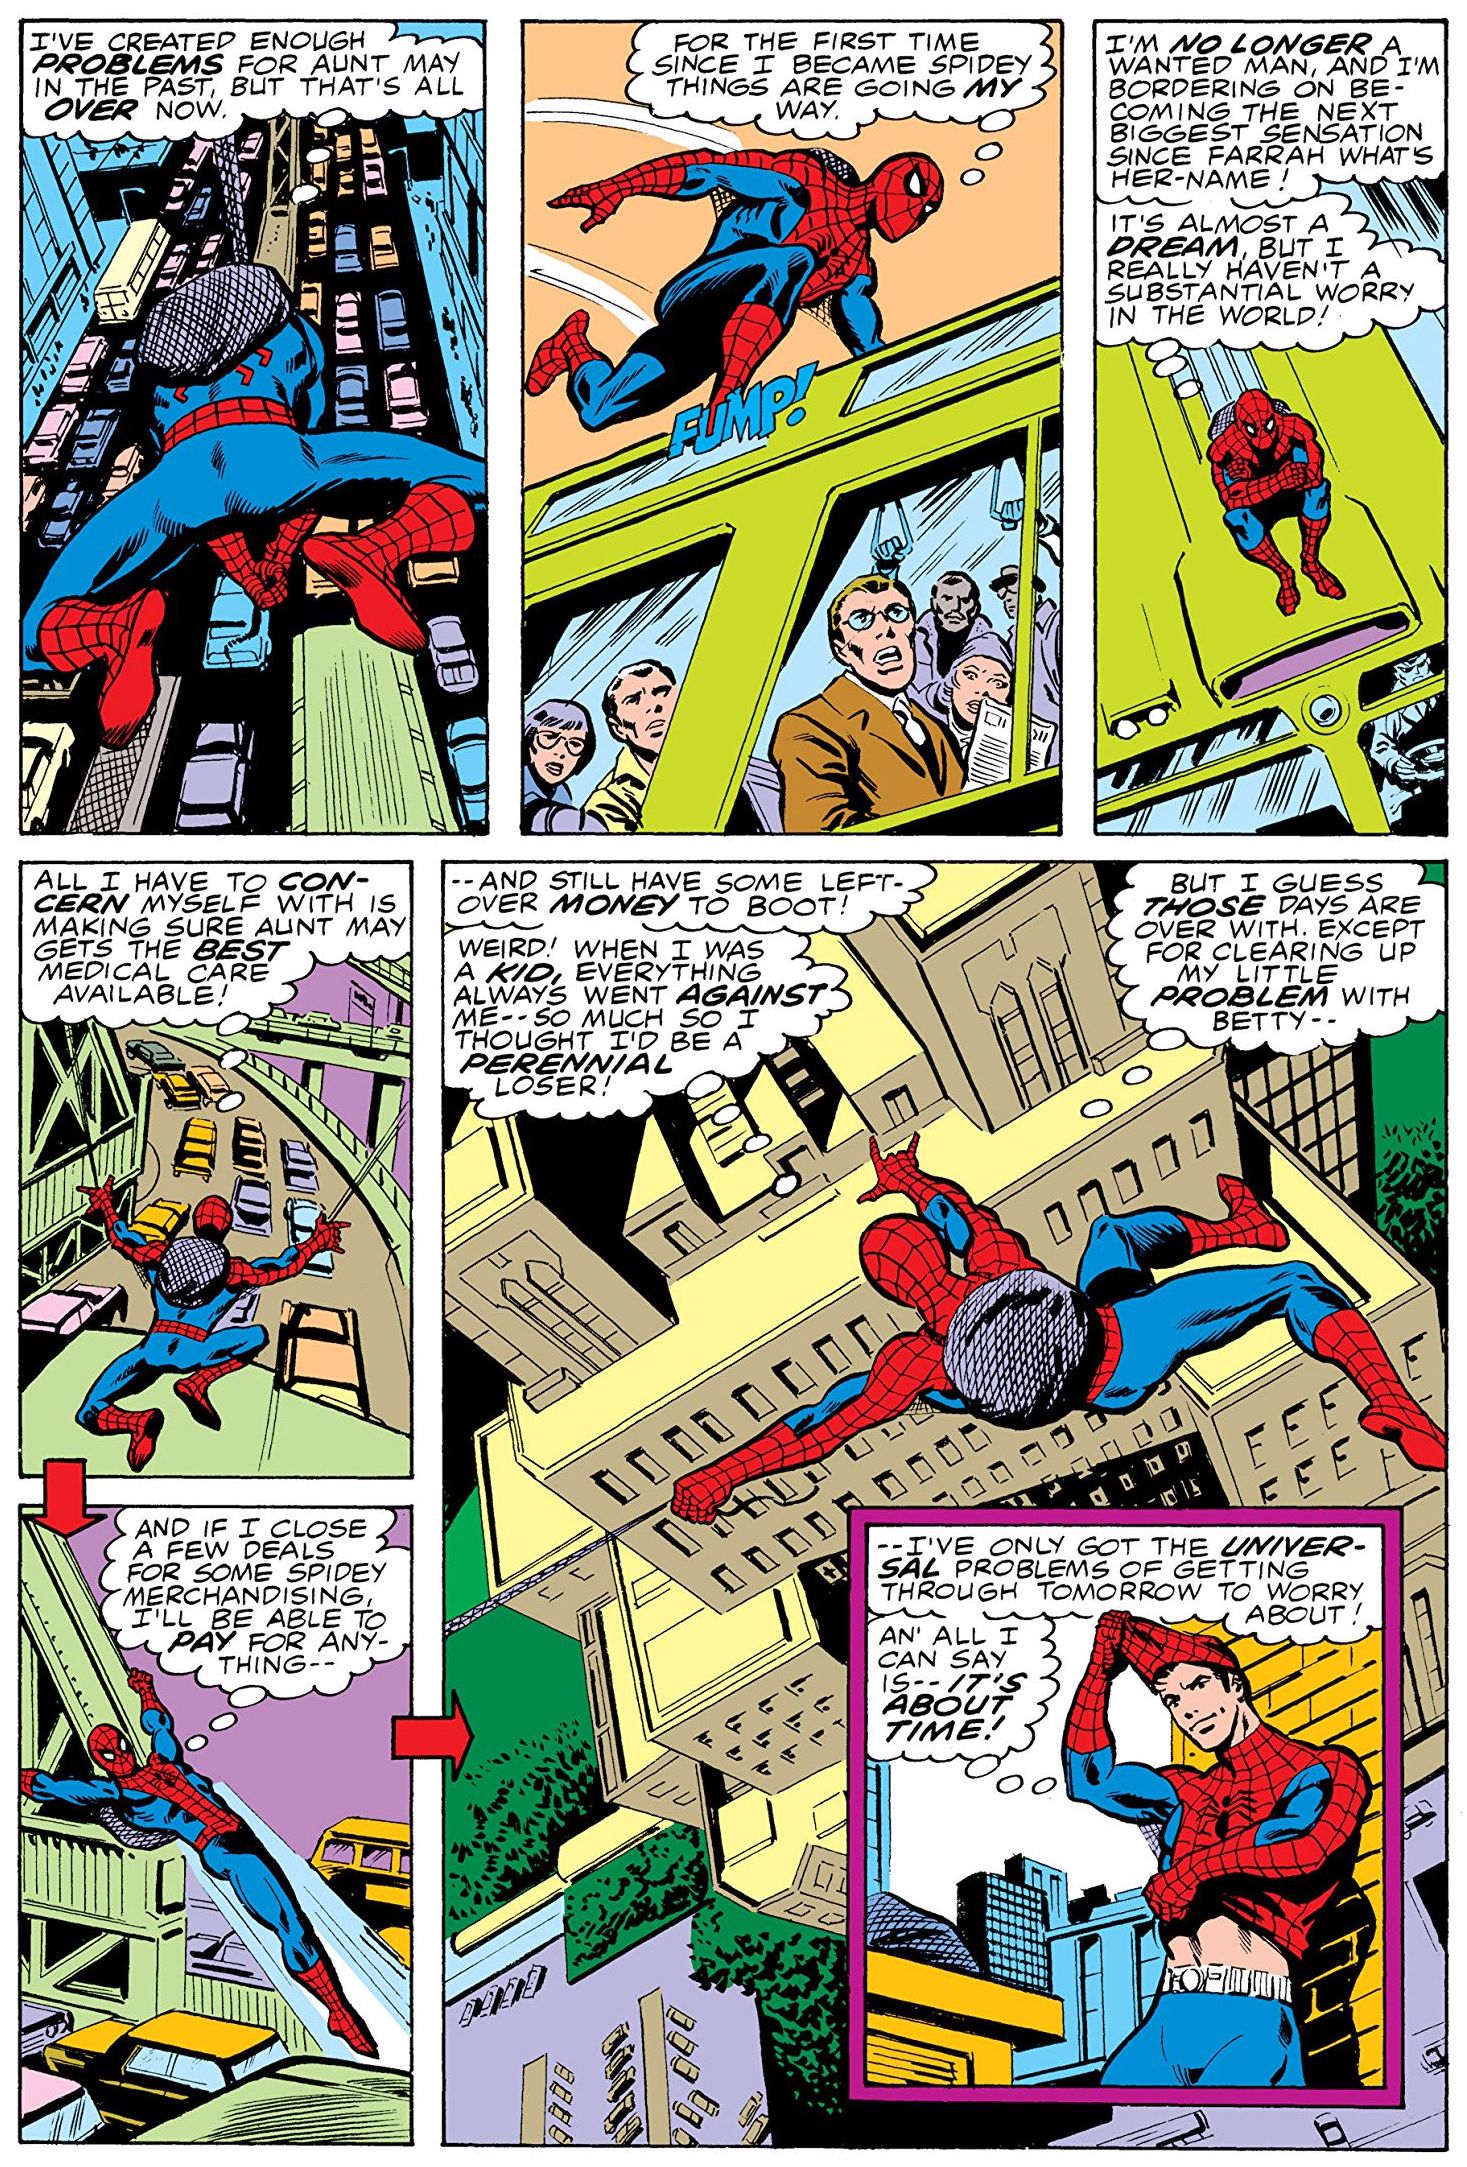 The Ups and Downs of AMAZING SPIDER-MAN #200 | 13th Dimension, Comics ...